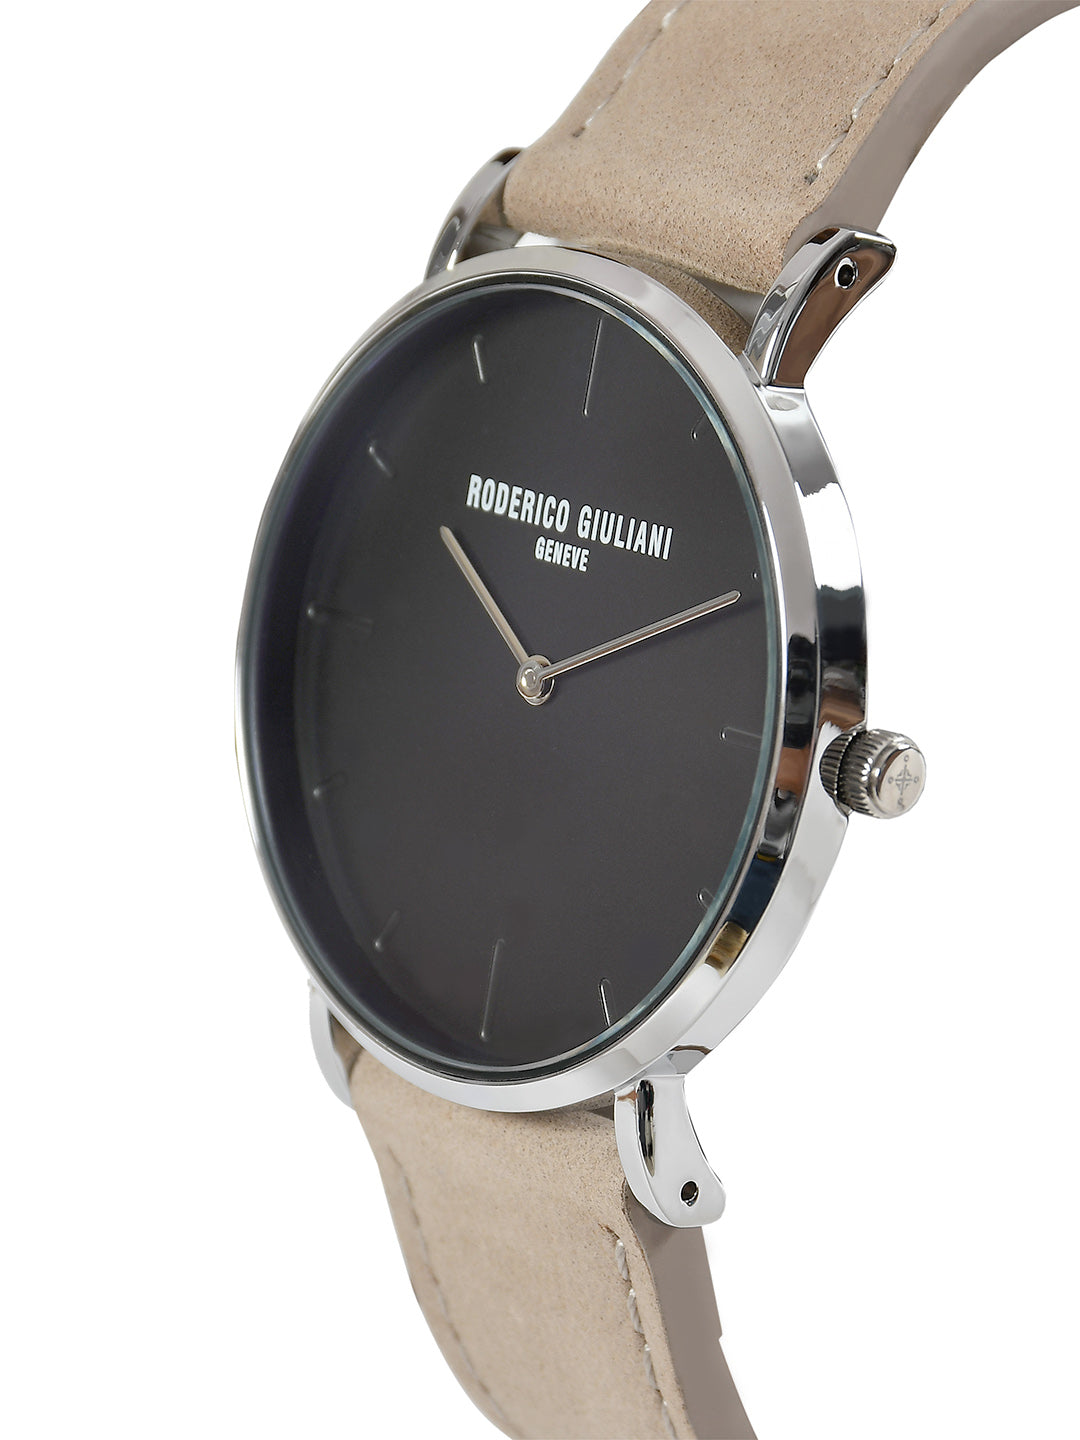 RODERICO GIULIANI ANALOG BLACK DIAL SILVER CASE BEIGE SUEDE LEATHER STRAP MEN'S WATCH MLEA-7601